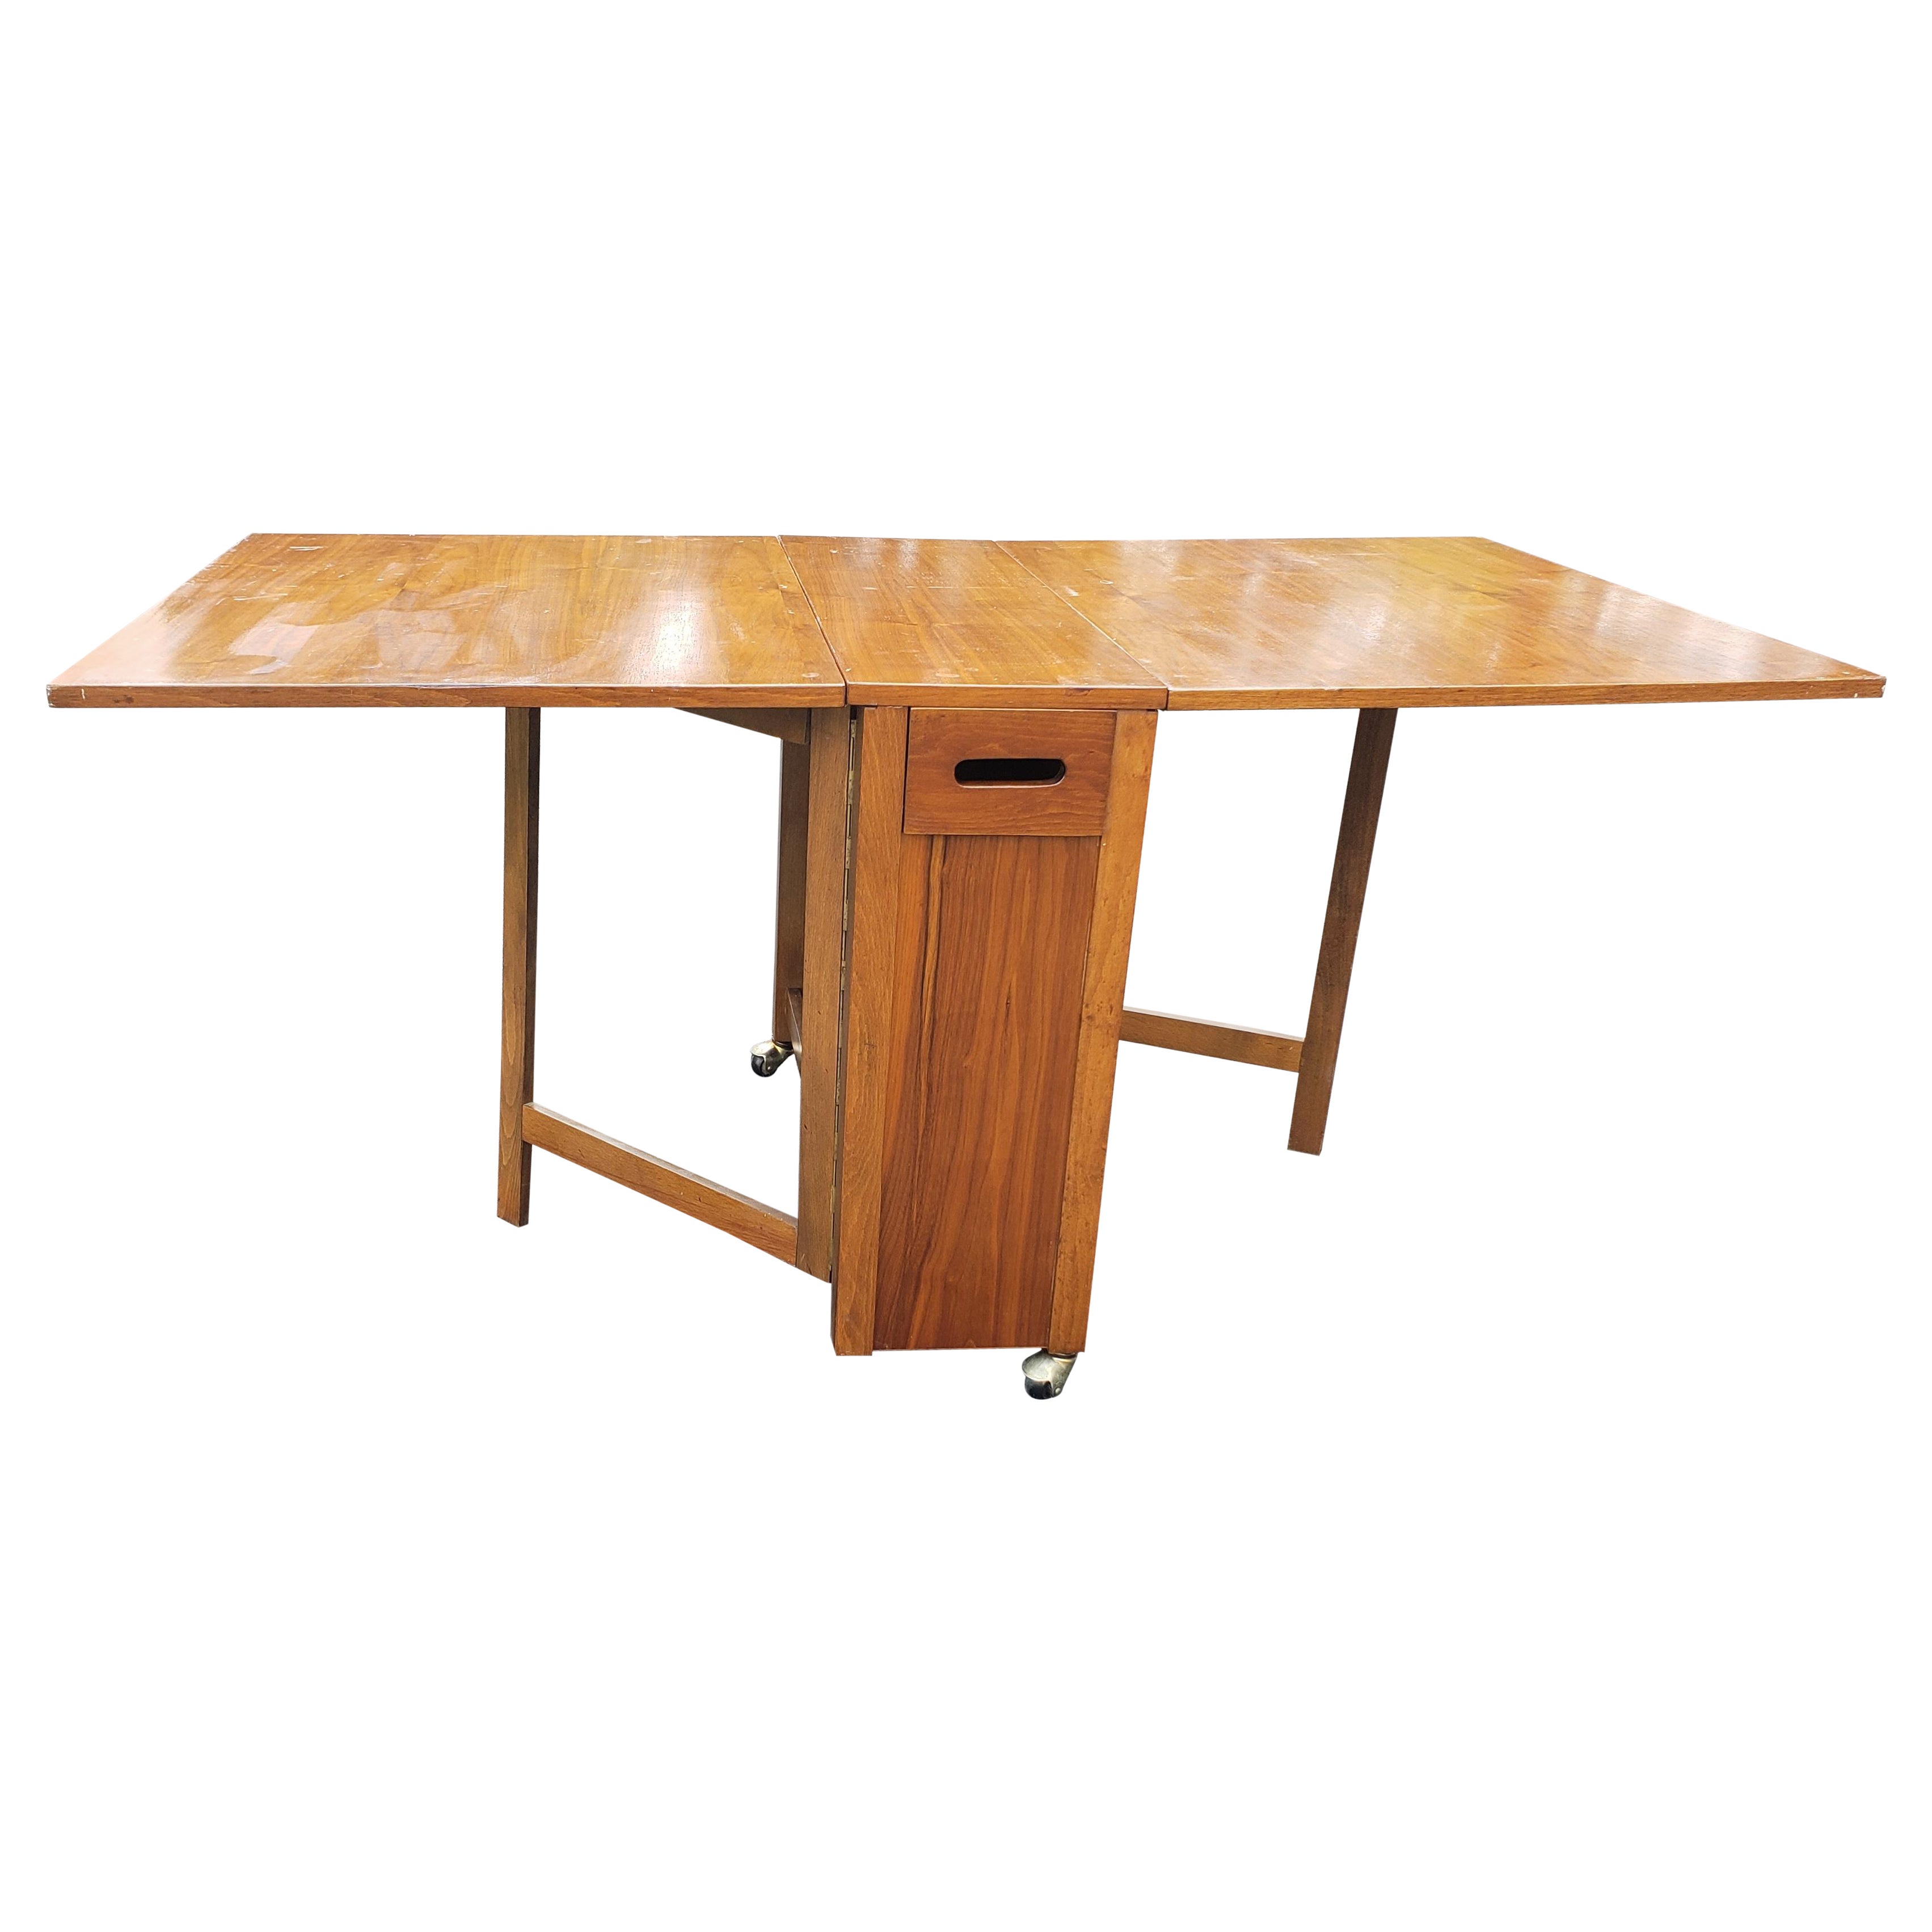 Mid-Century Danish Modern Teak Drop-Leaf Dining Table with Storage on Rollers